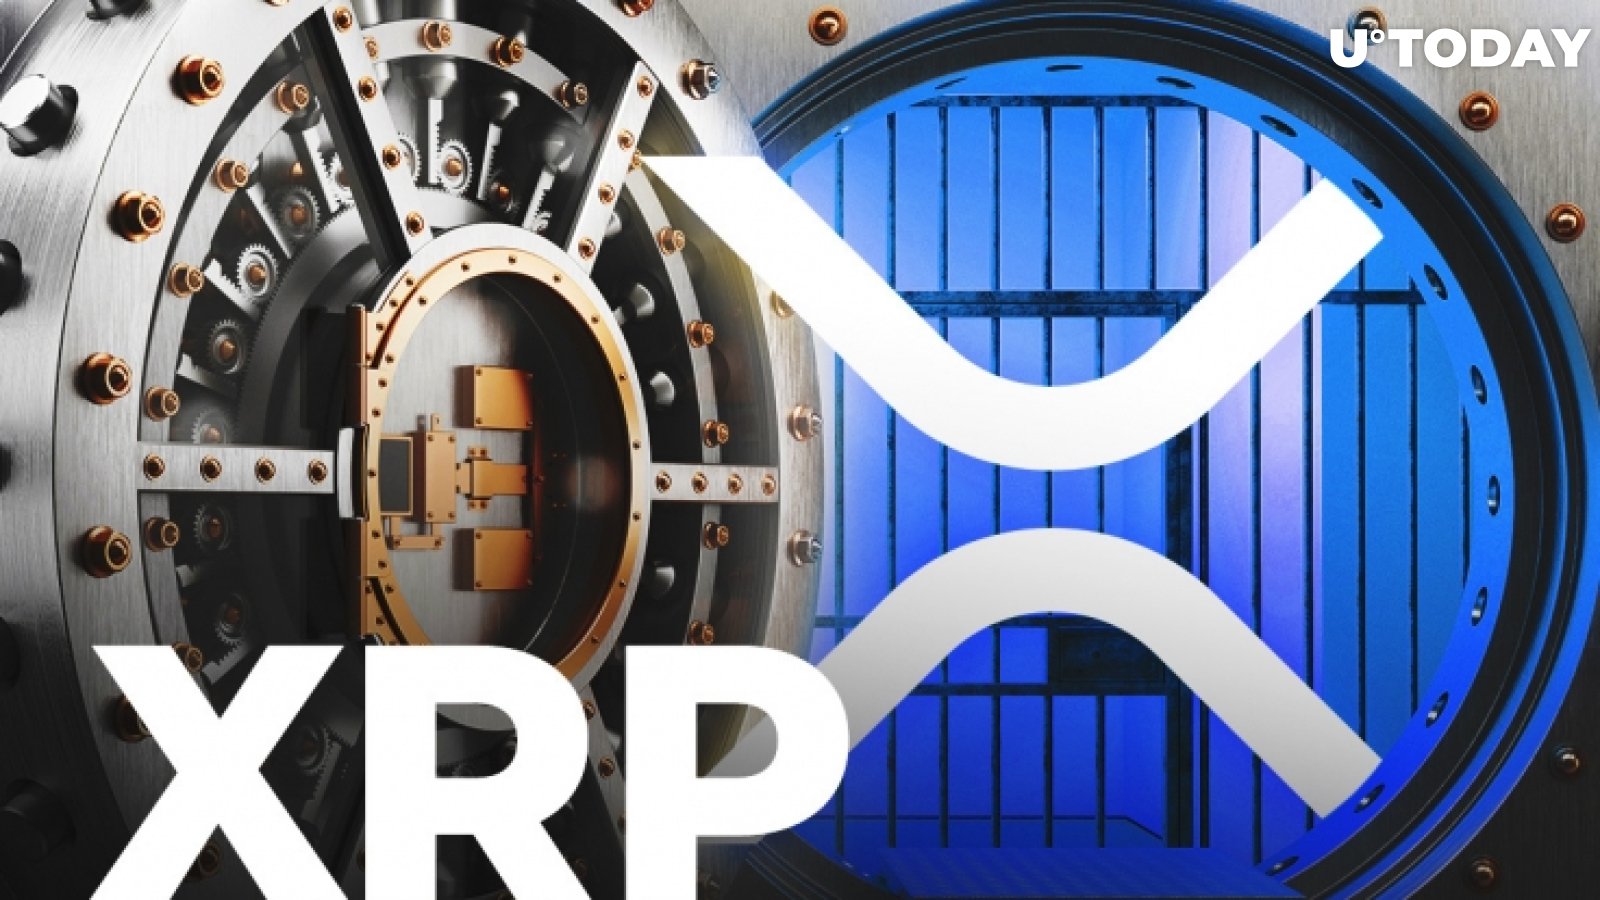 Ripple Unlocks 1,000,000 XRP From Escrow While Token's Price Dips to $0.17